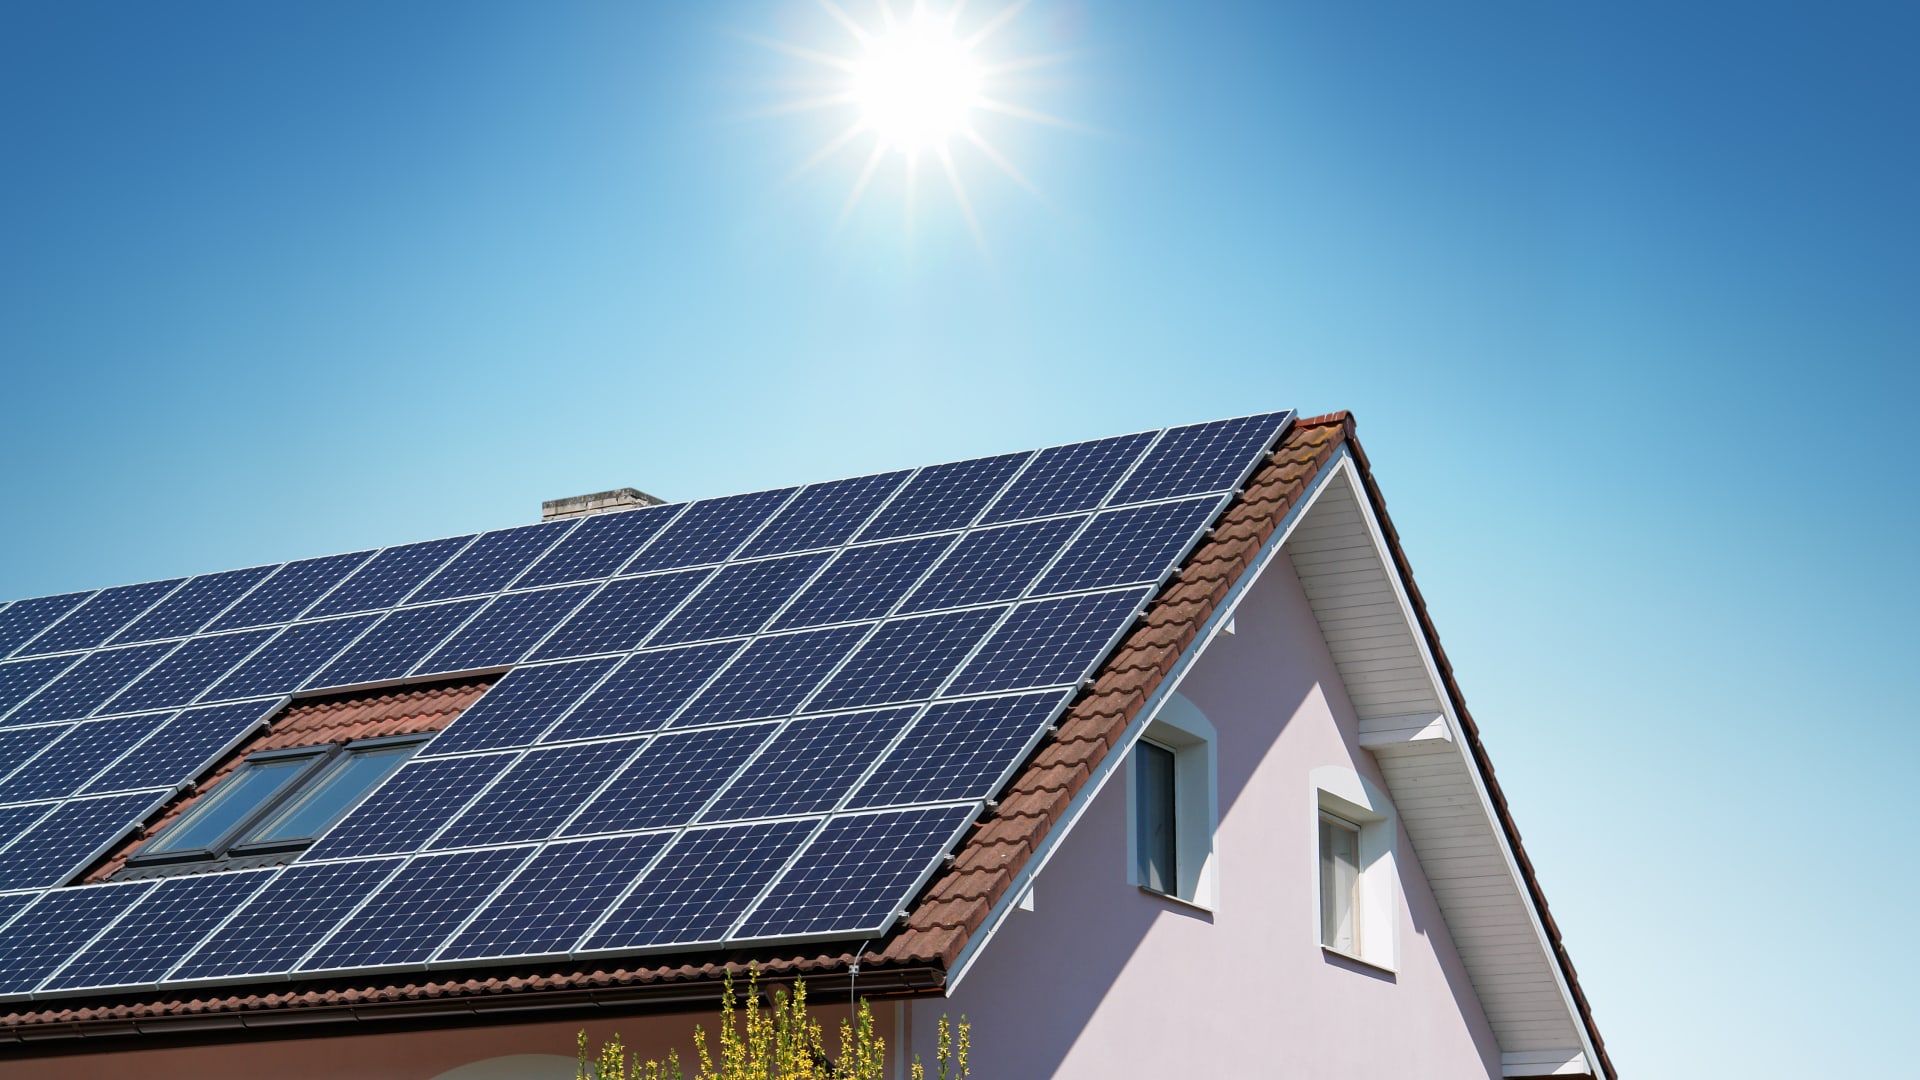 These solar power providers could gain up to 126% as market consolidation increases